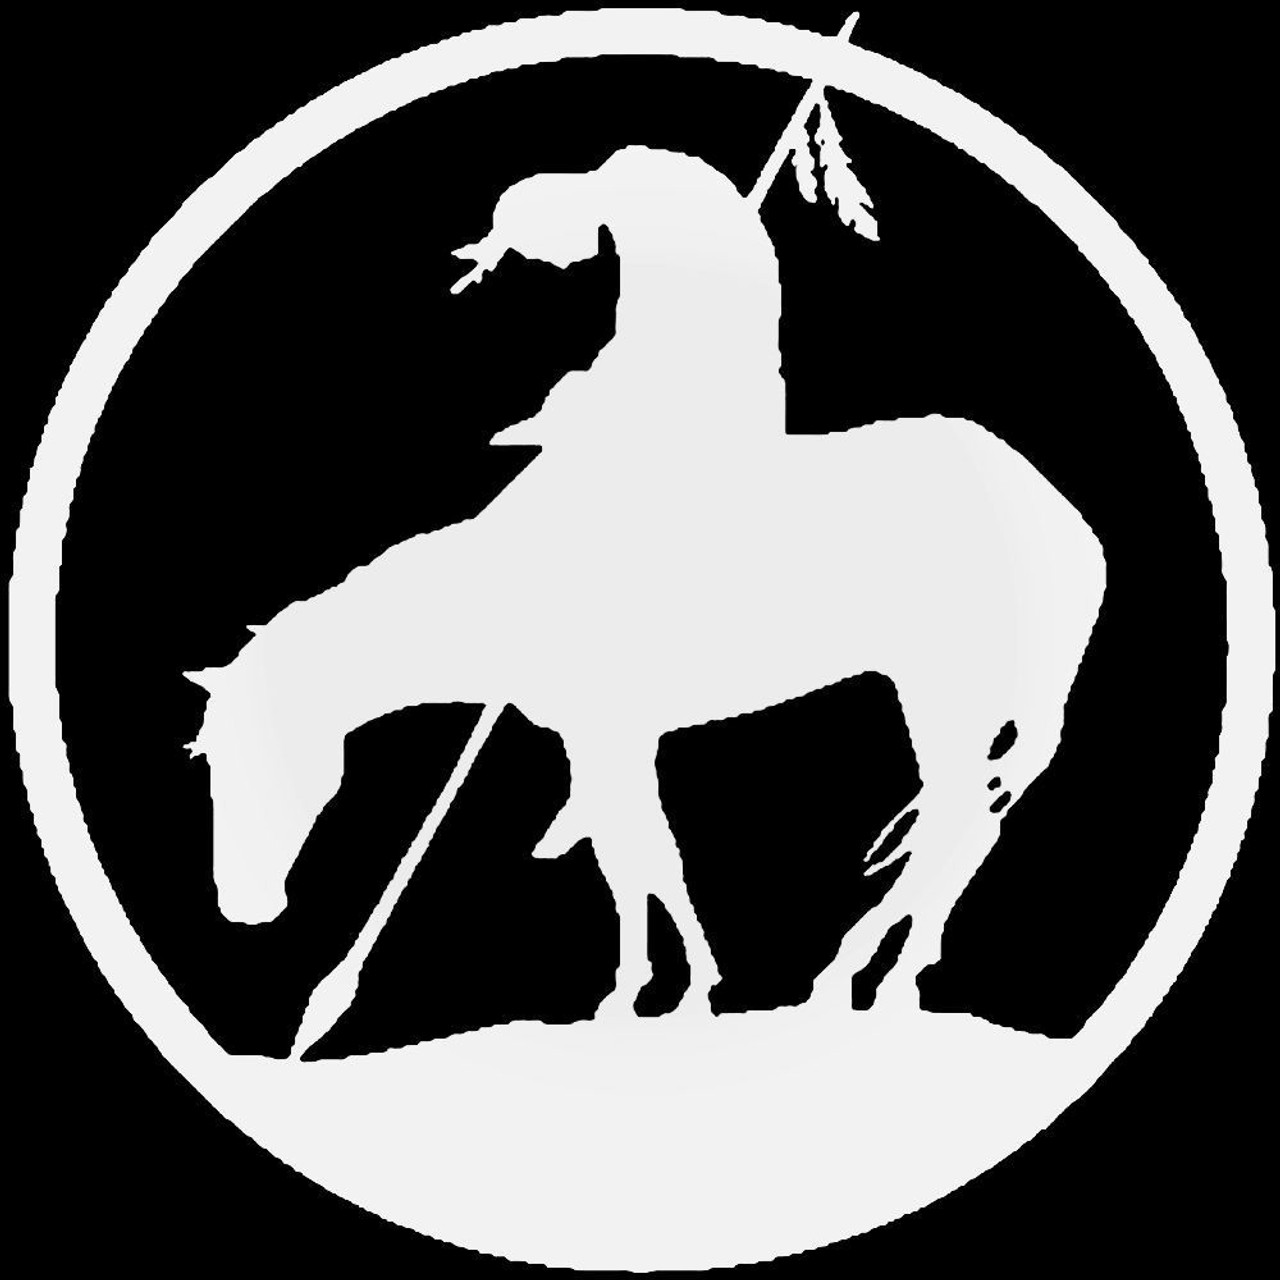 Trails End Native American Indian Icon Symbol Decal